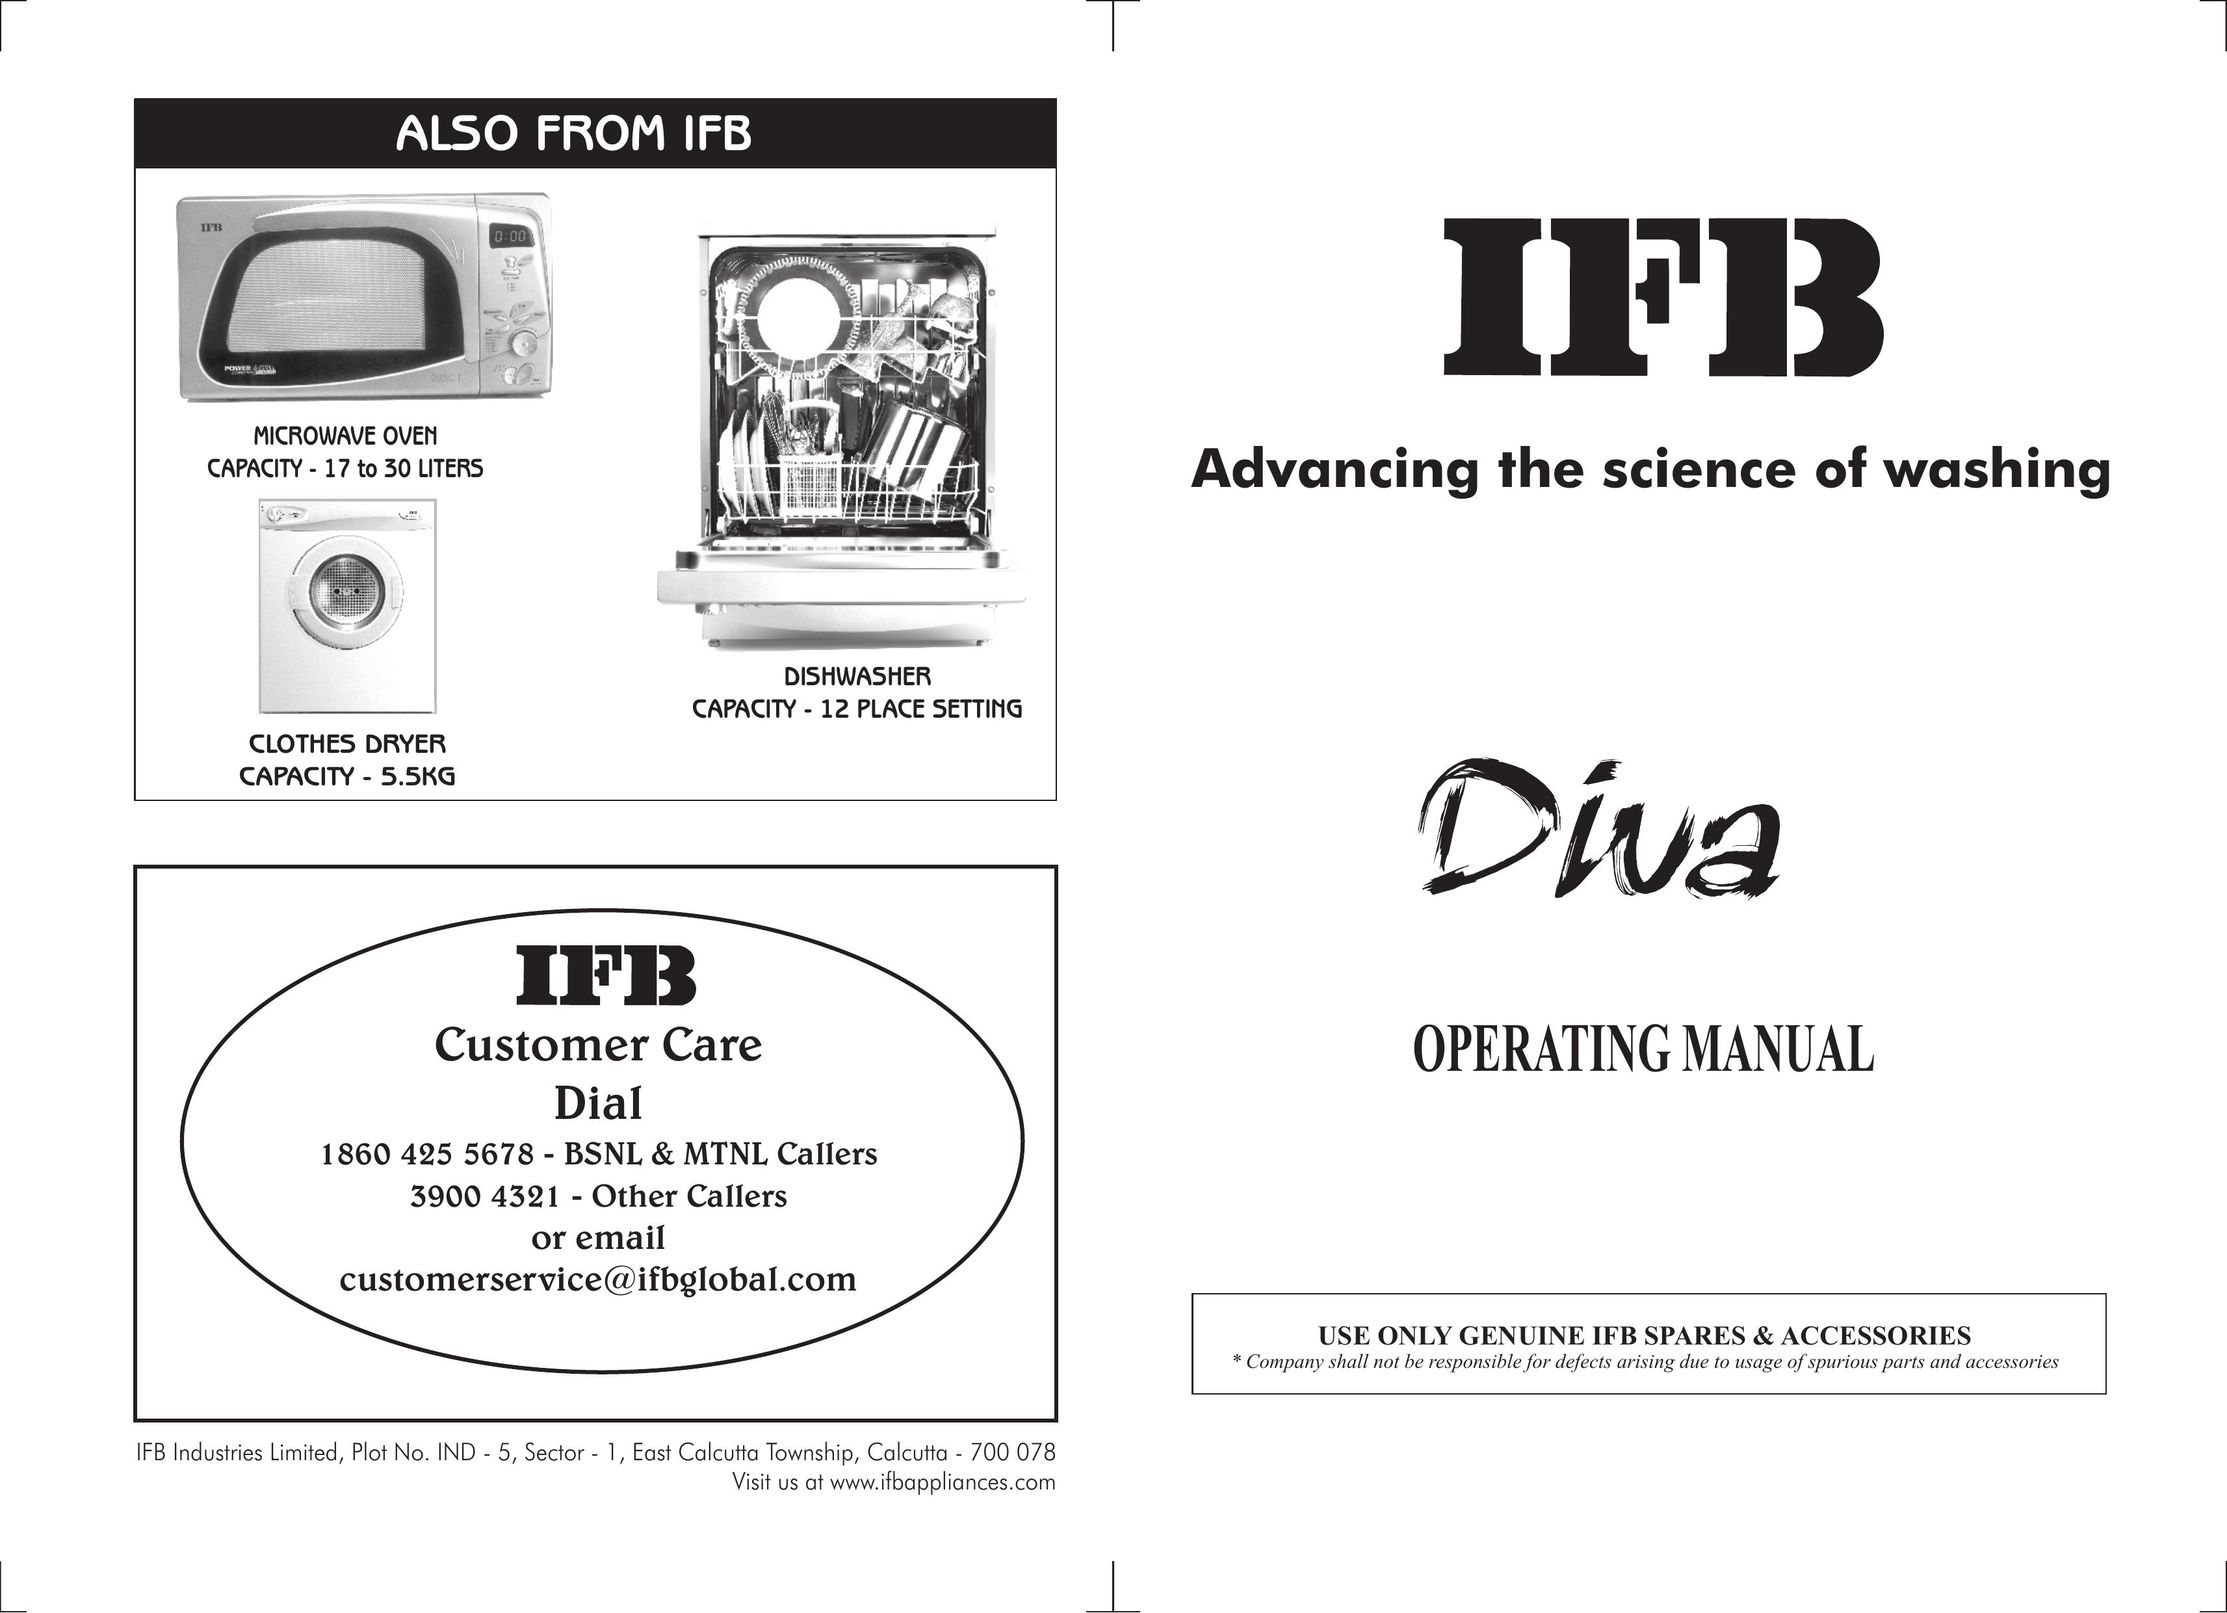 IFB Appliances WT DIV B Microwave Oven User Manual